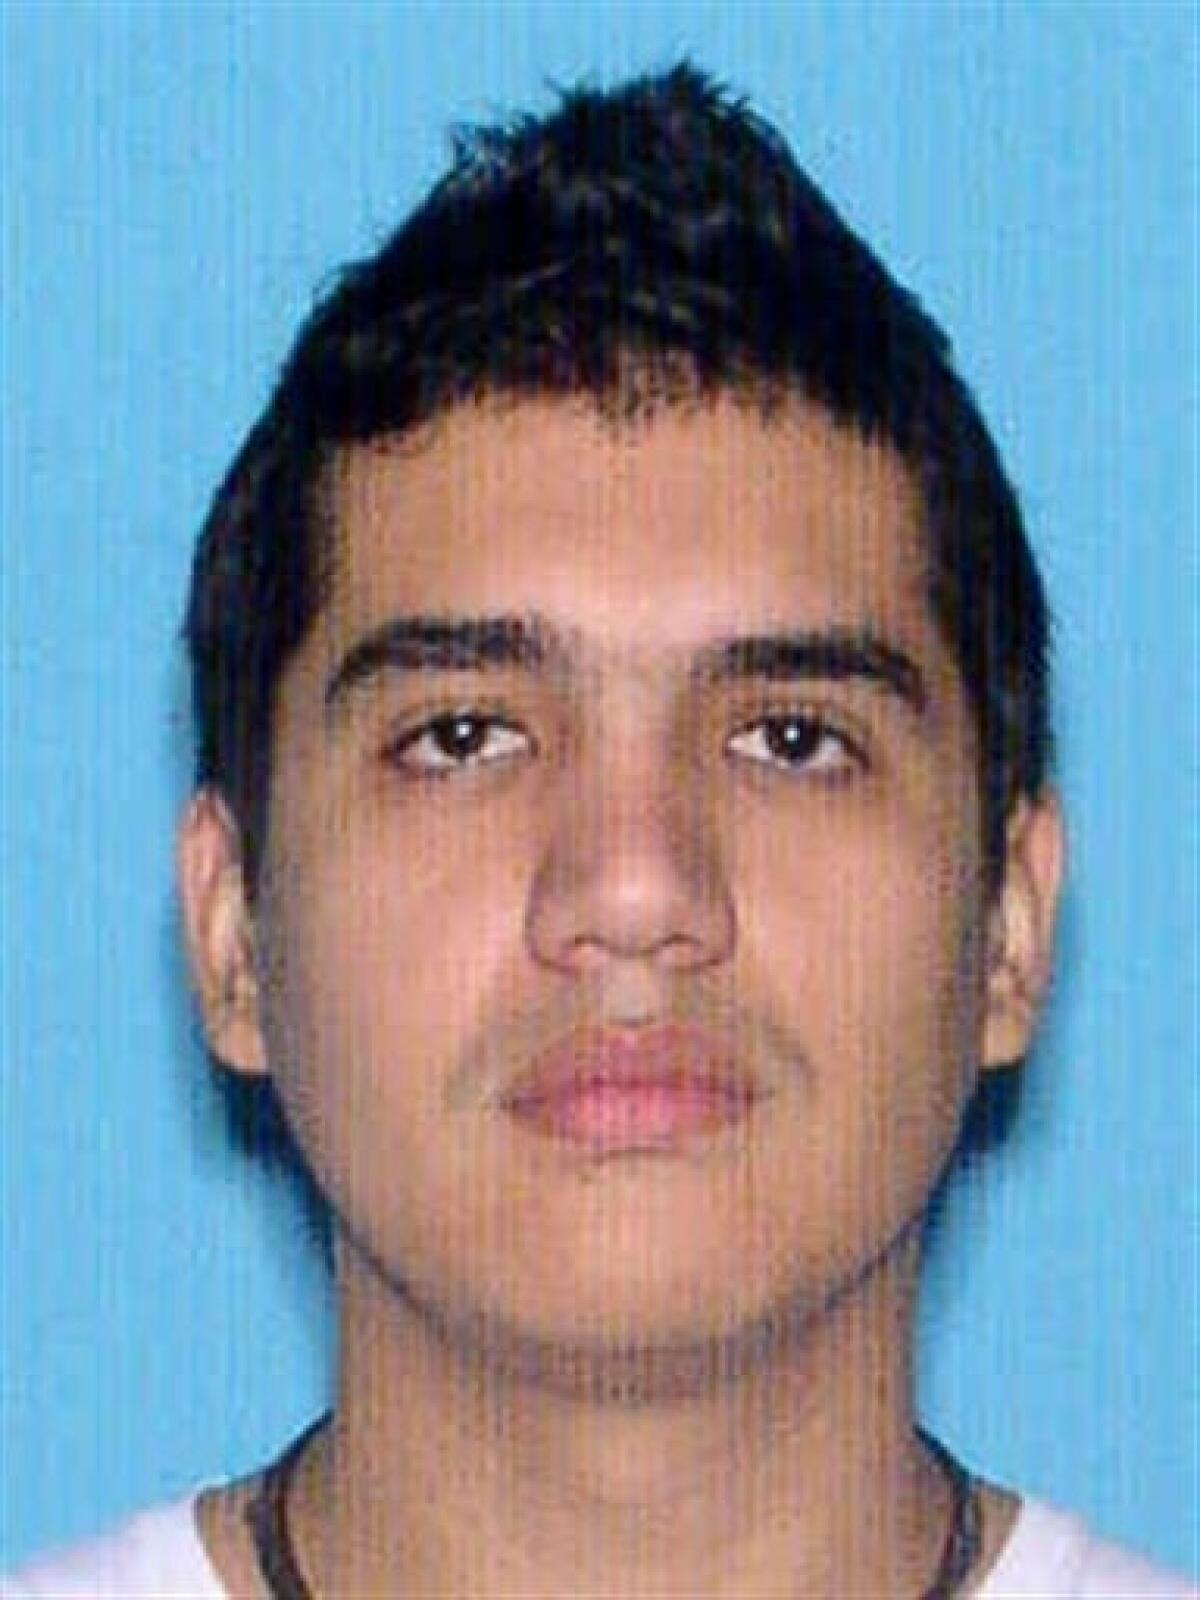 Pedro Gutierrez is seen in an undated photo provided by the Bergen County, N.J., Prosecutor's Office. Authorities say Gutierrez, 24, accused of stabbing his estranged wife to death, has waived extradition from Florida. Customs agents in Orlando detained Gutierrez as he boarded a flight for his native Colombia on Tuesday night, Oct. 4, 2011. The Bergen County Prosecutor's Office says the 24-year-old fled after stabbing Shaday Betancourth to death in a Tenafly home. Gutierrez is charged with murder. (AP Photo/Bergen County Prosecutor's Office)